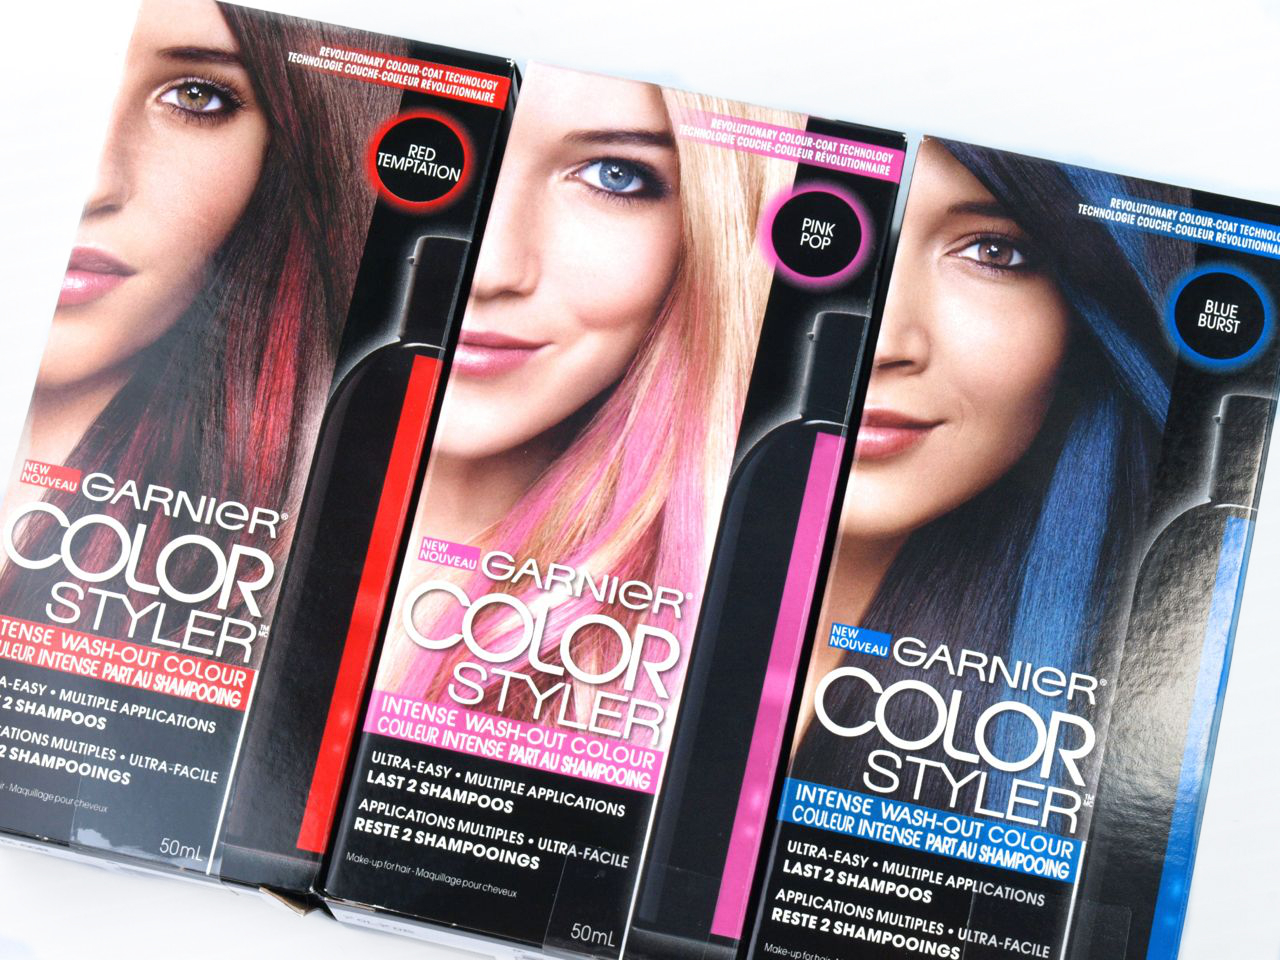 Garnier Color Styler Intense Wash-Out Color: Review | The ...